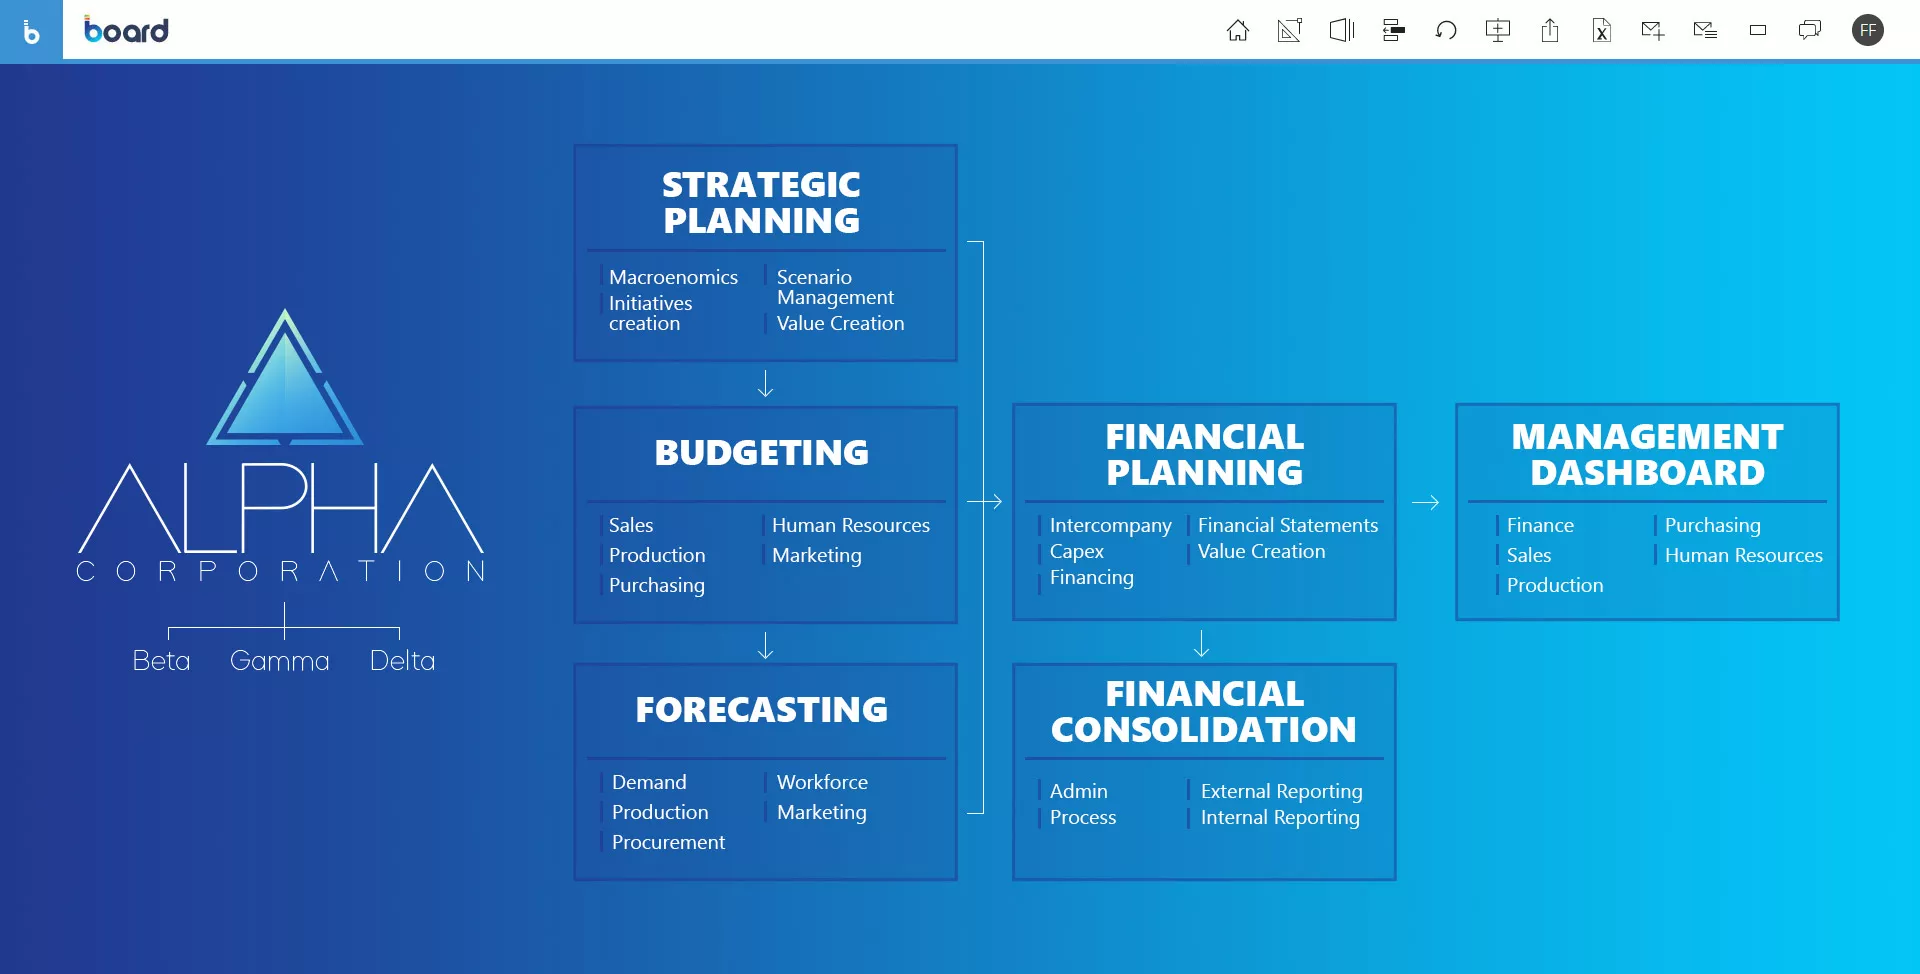 Budgeting, Planning, and Forecasting Image 1